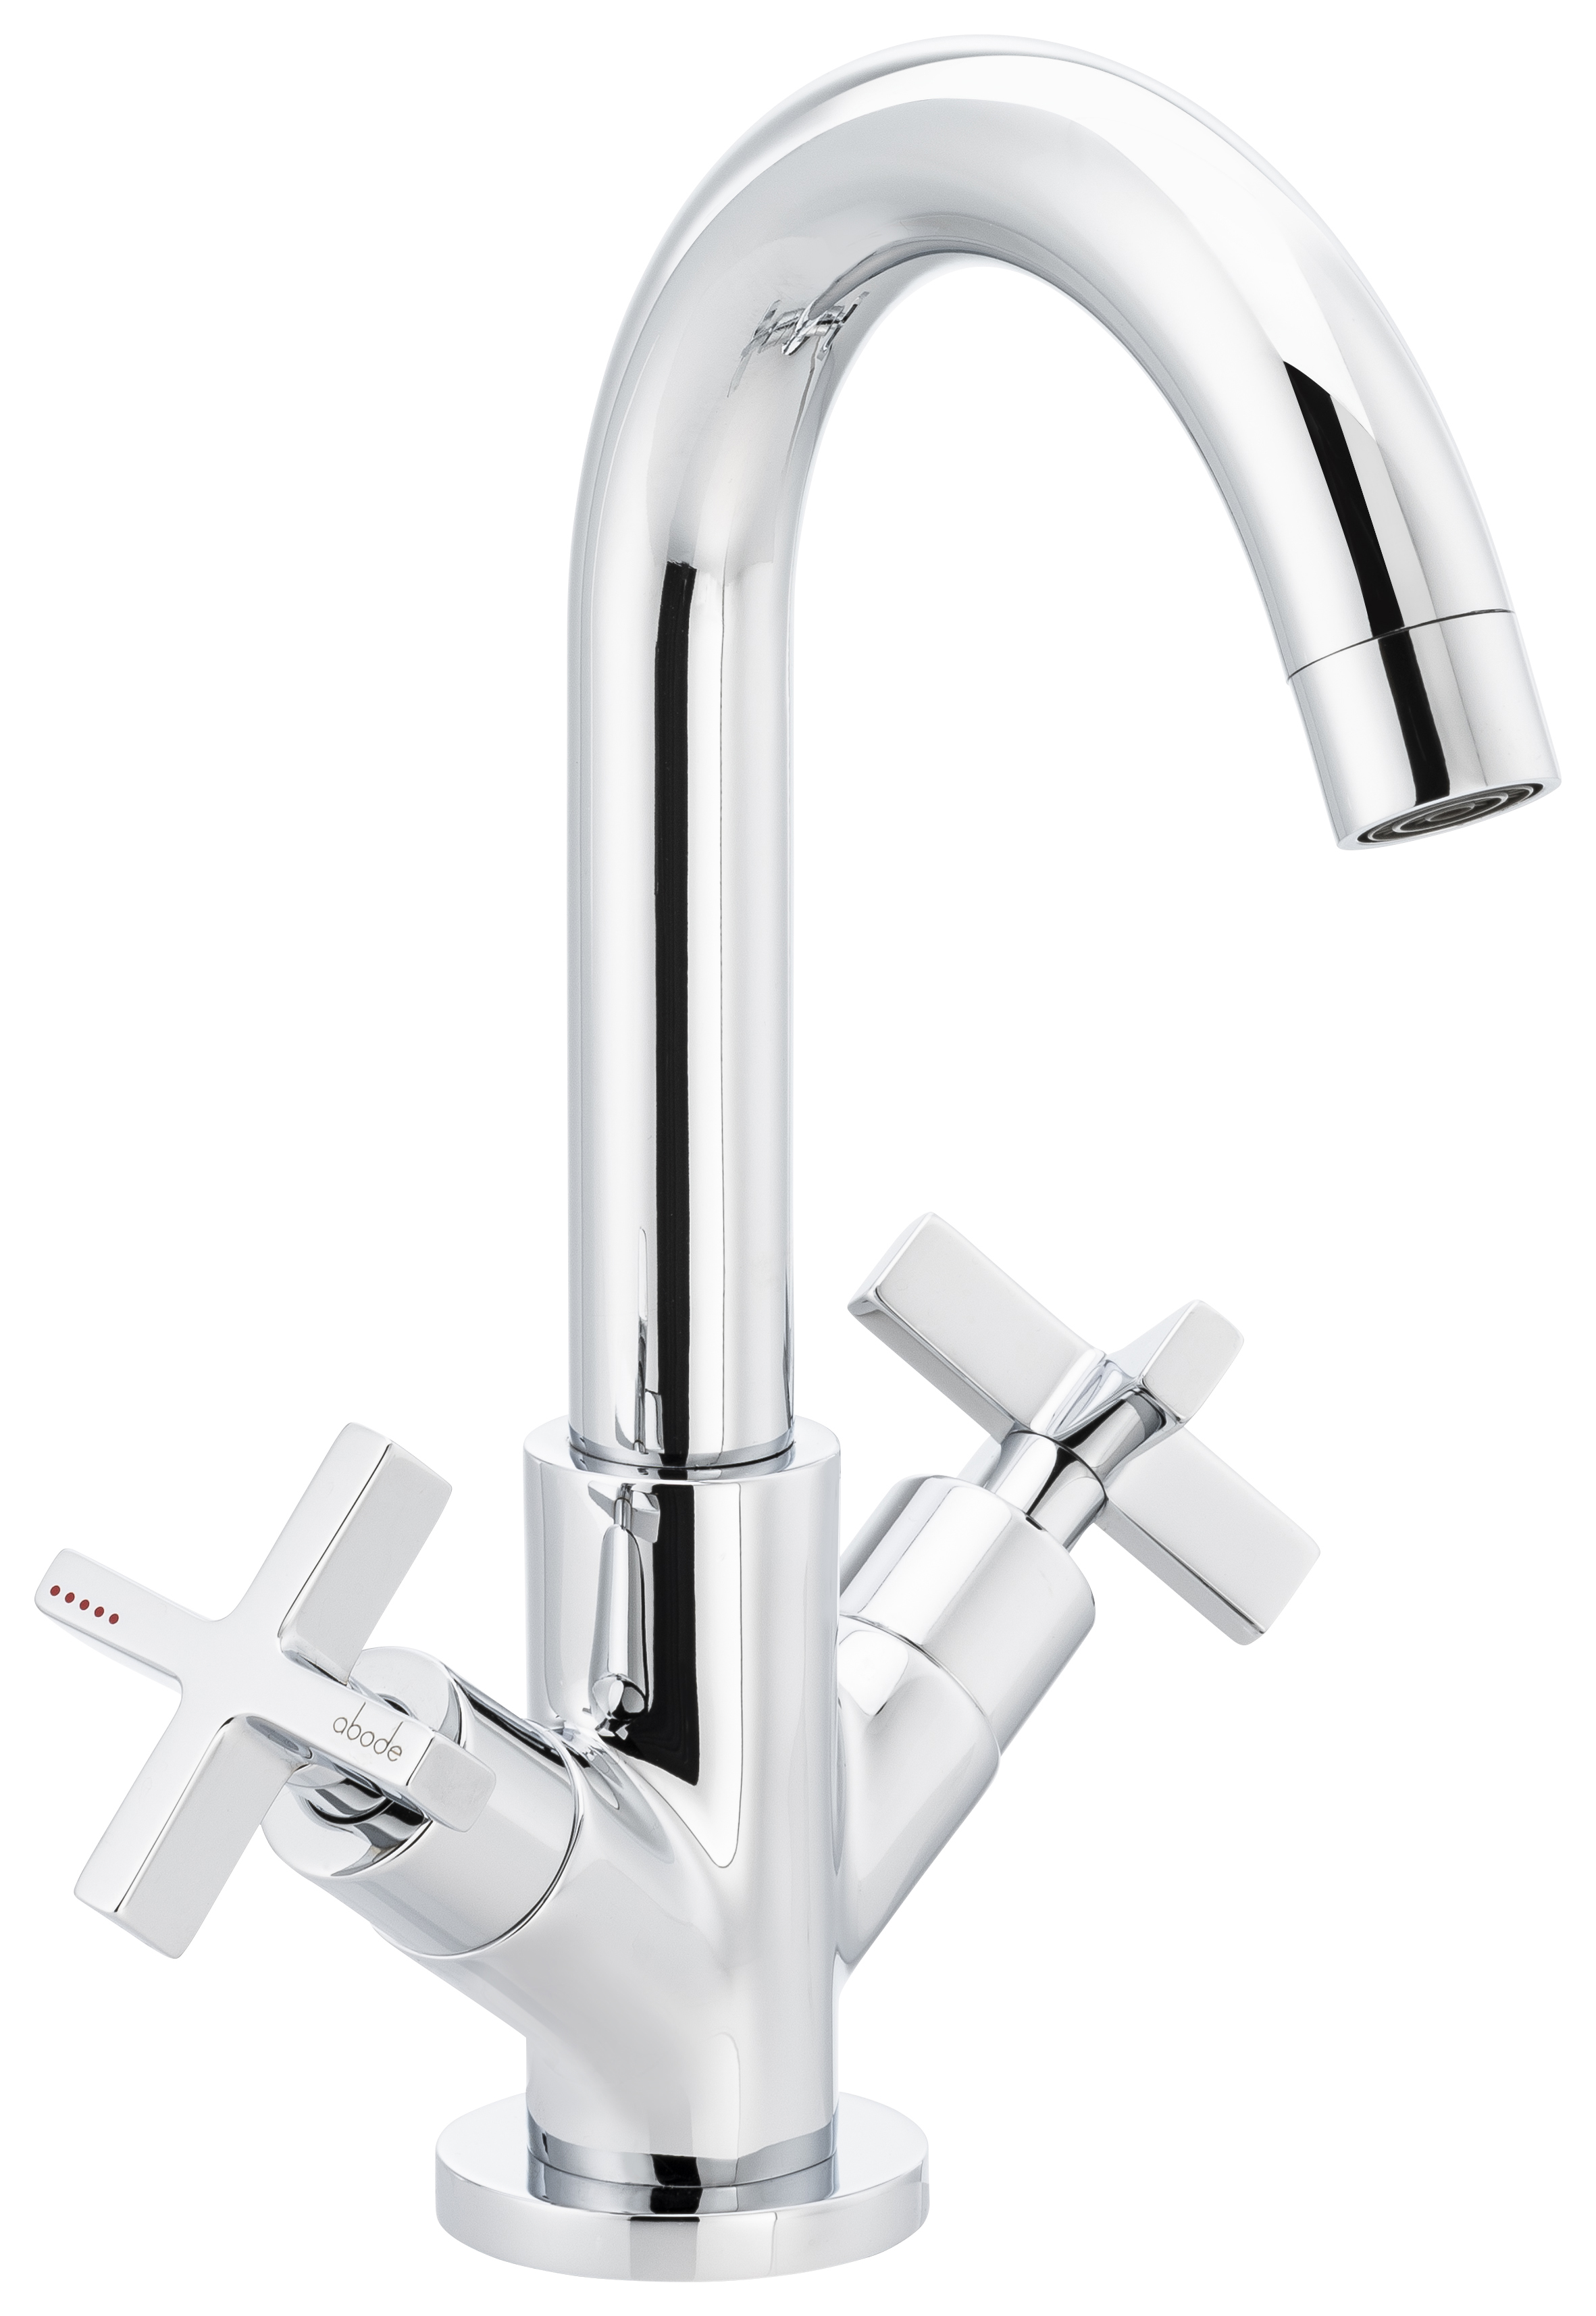 Image of Abode Serenitie Deck Mounted Basin Mixer Tap - Chrome